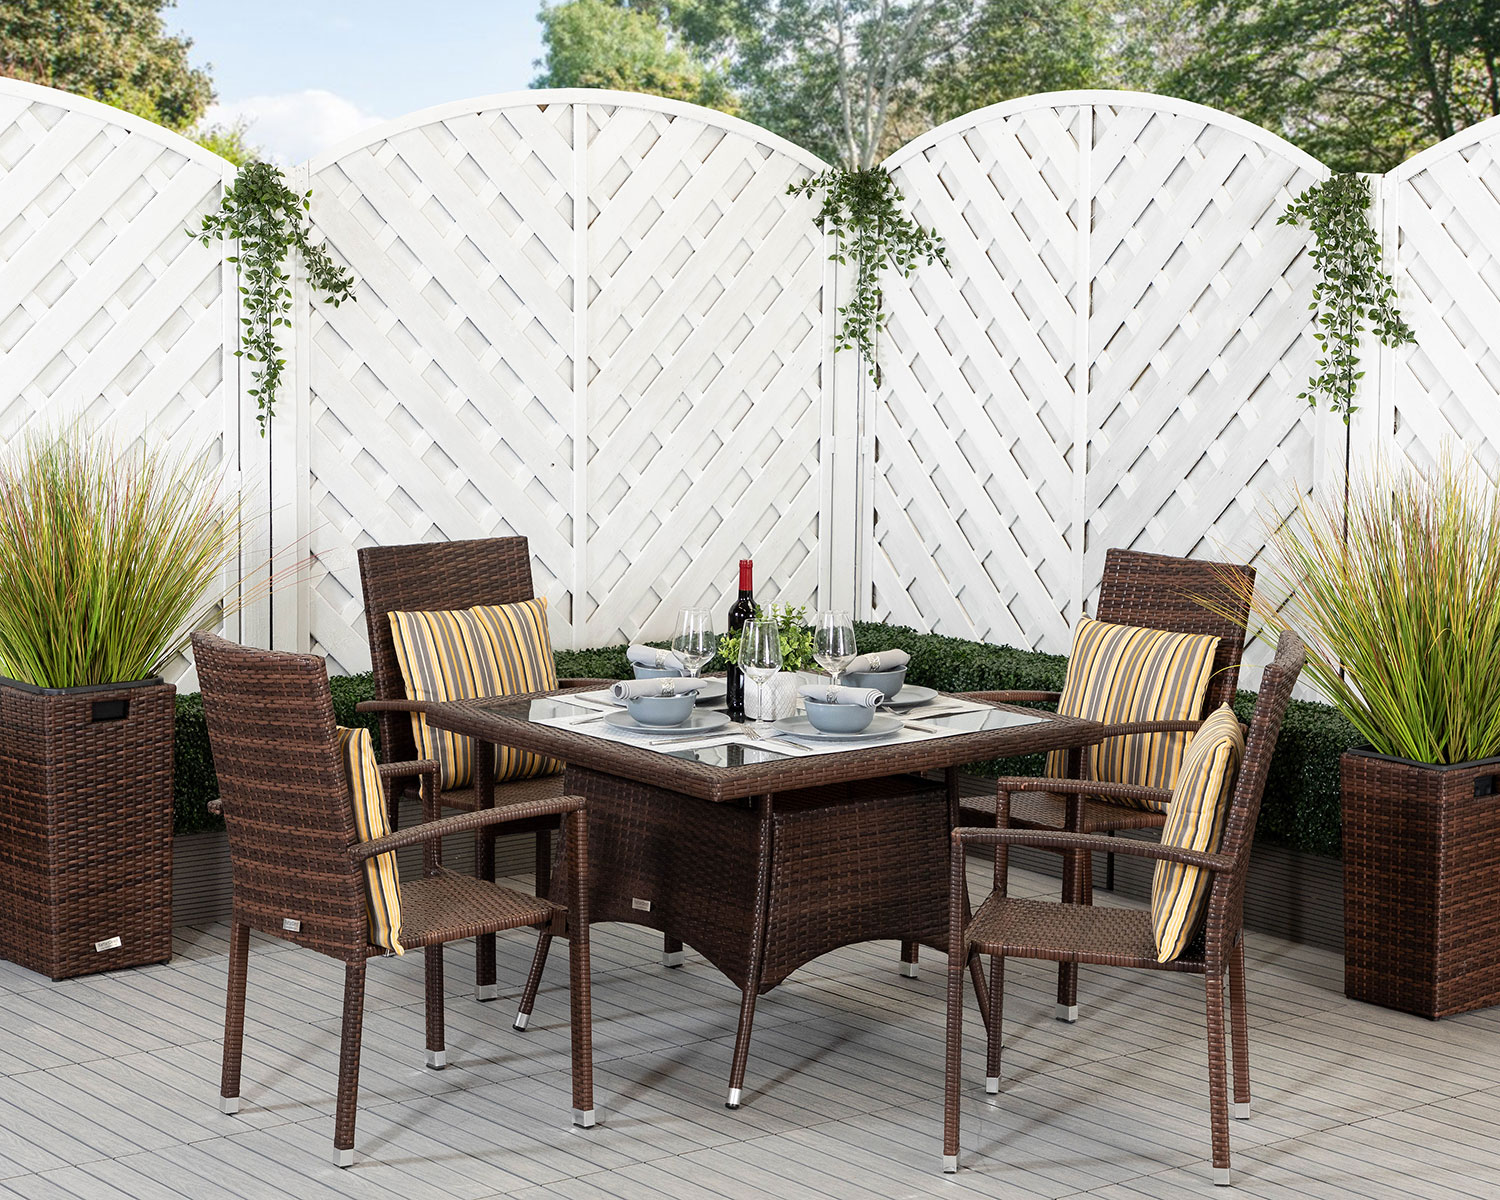 4 Seat Rattan Garden Dining Set With Square Dining Table In Brown Rio Rattan Direct